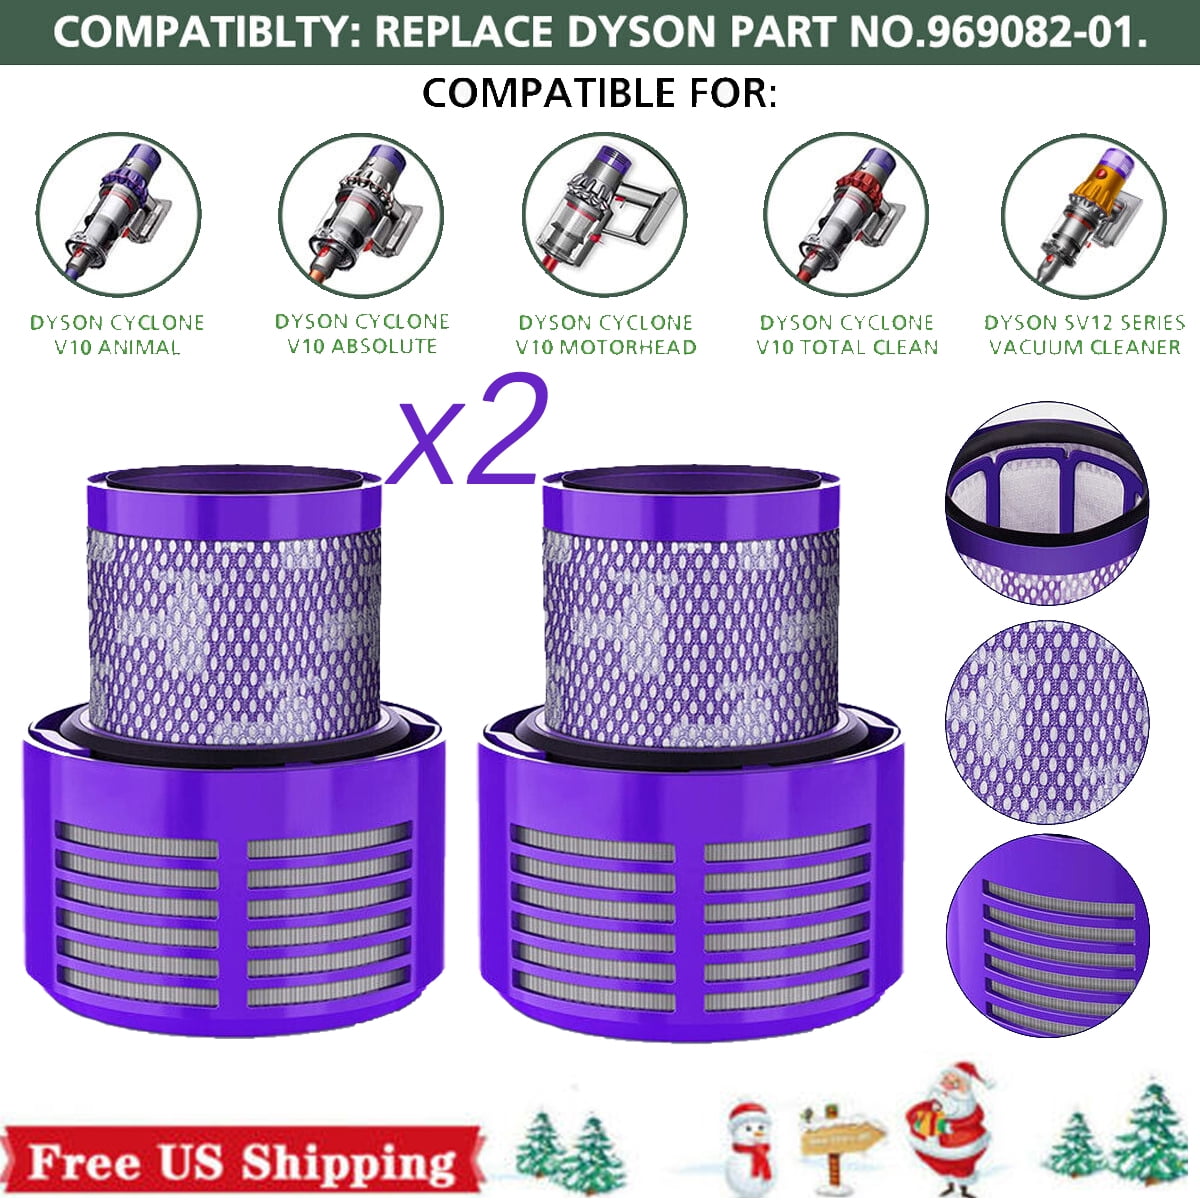 2-Pack HEPA Replacement V10 Filter for Dyson V10 SV12 Part No